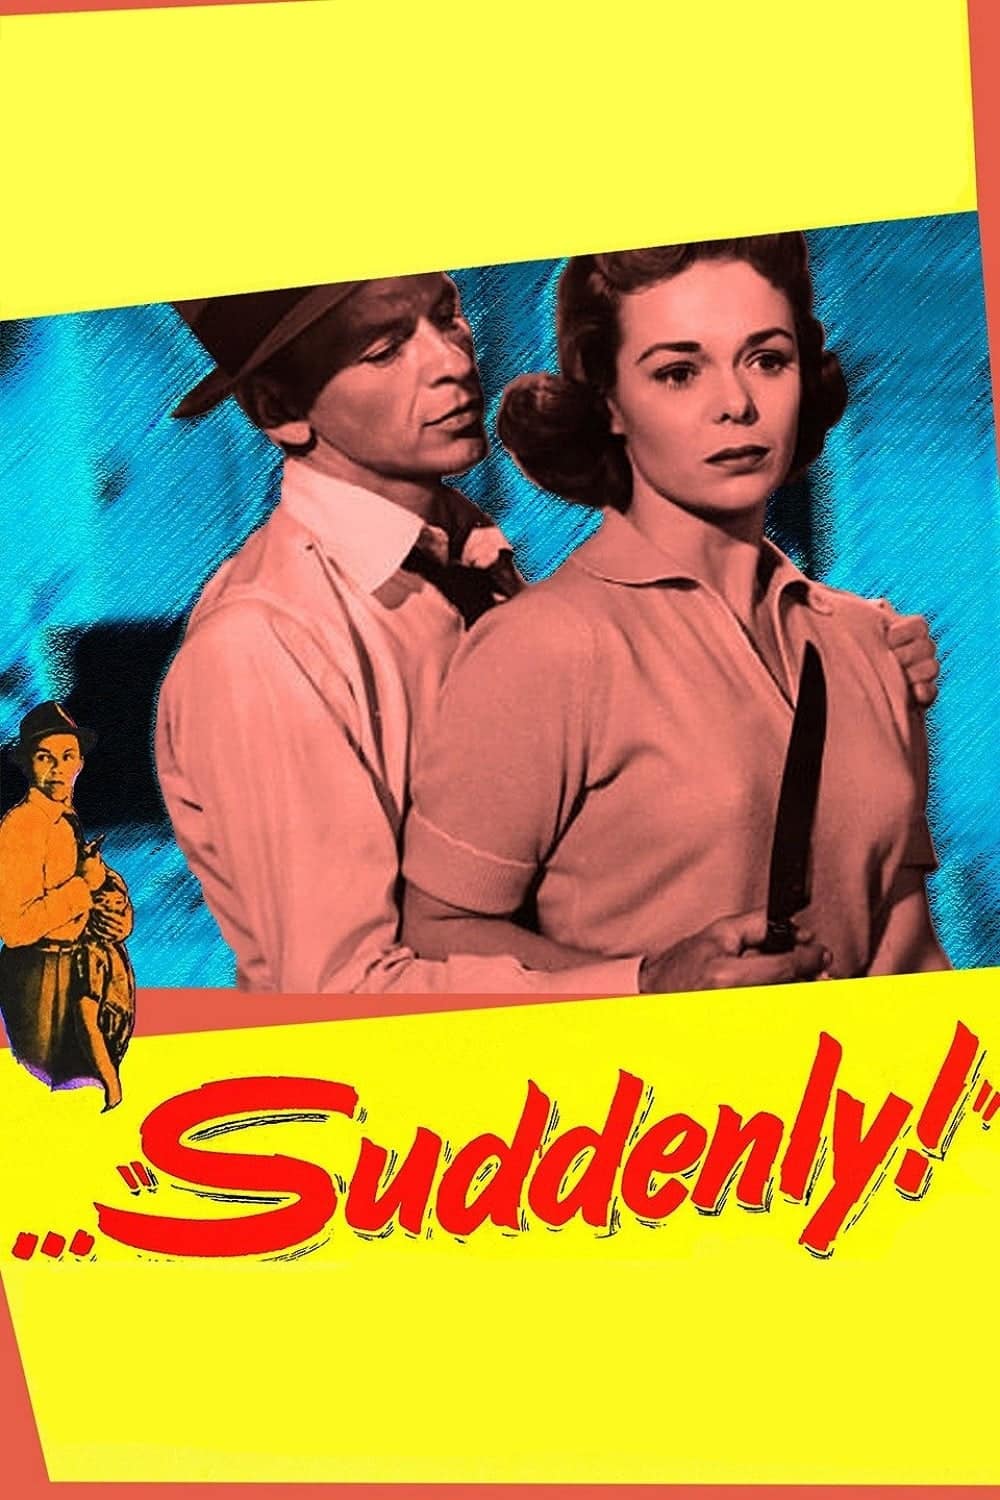 Poster for the movie "Suddenly"